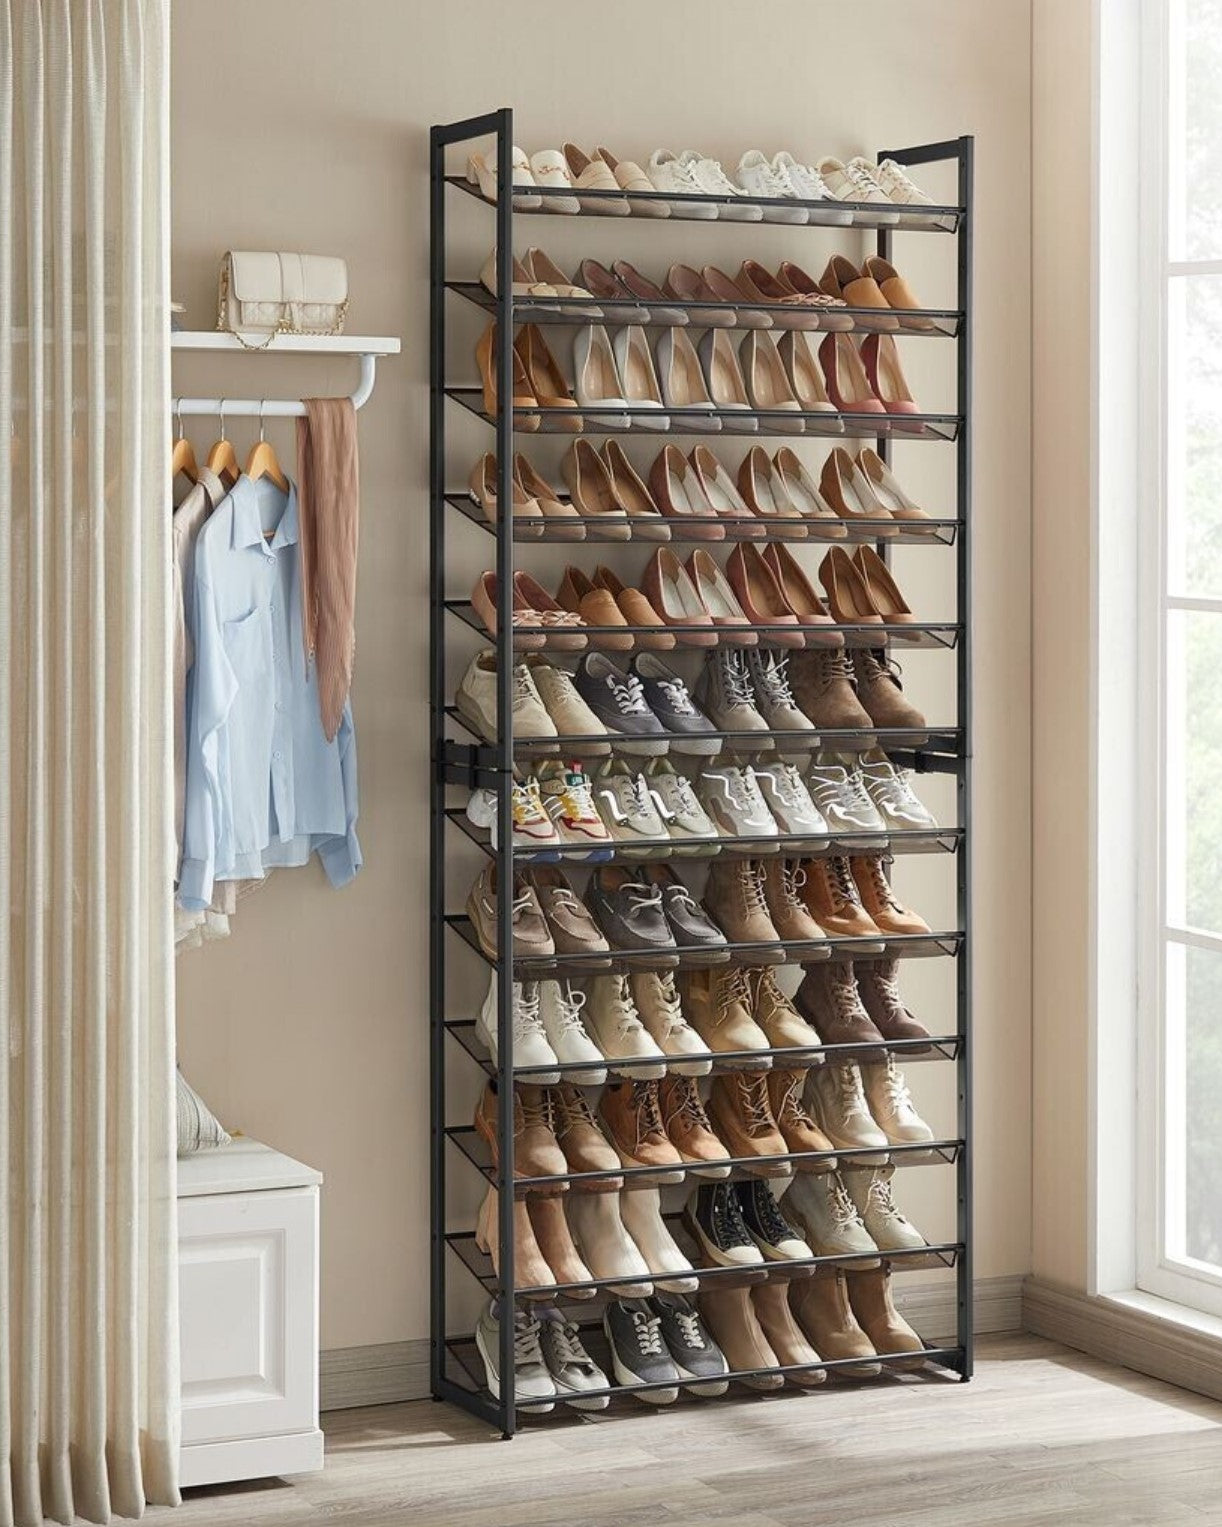 Etagere Chaussure, Meuble Chaussures, Etagere a Chaussure, Meuble de Chaussure, Etagere Chaussures, étagère à chaussures